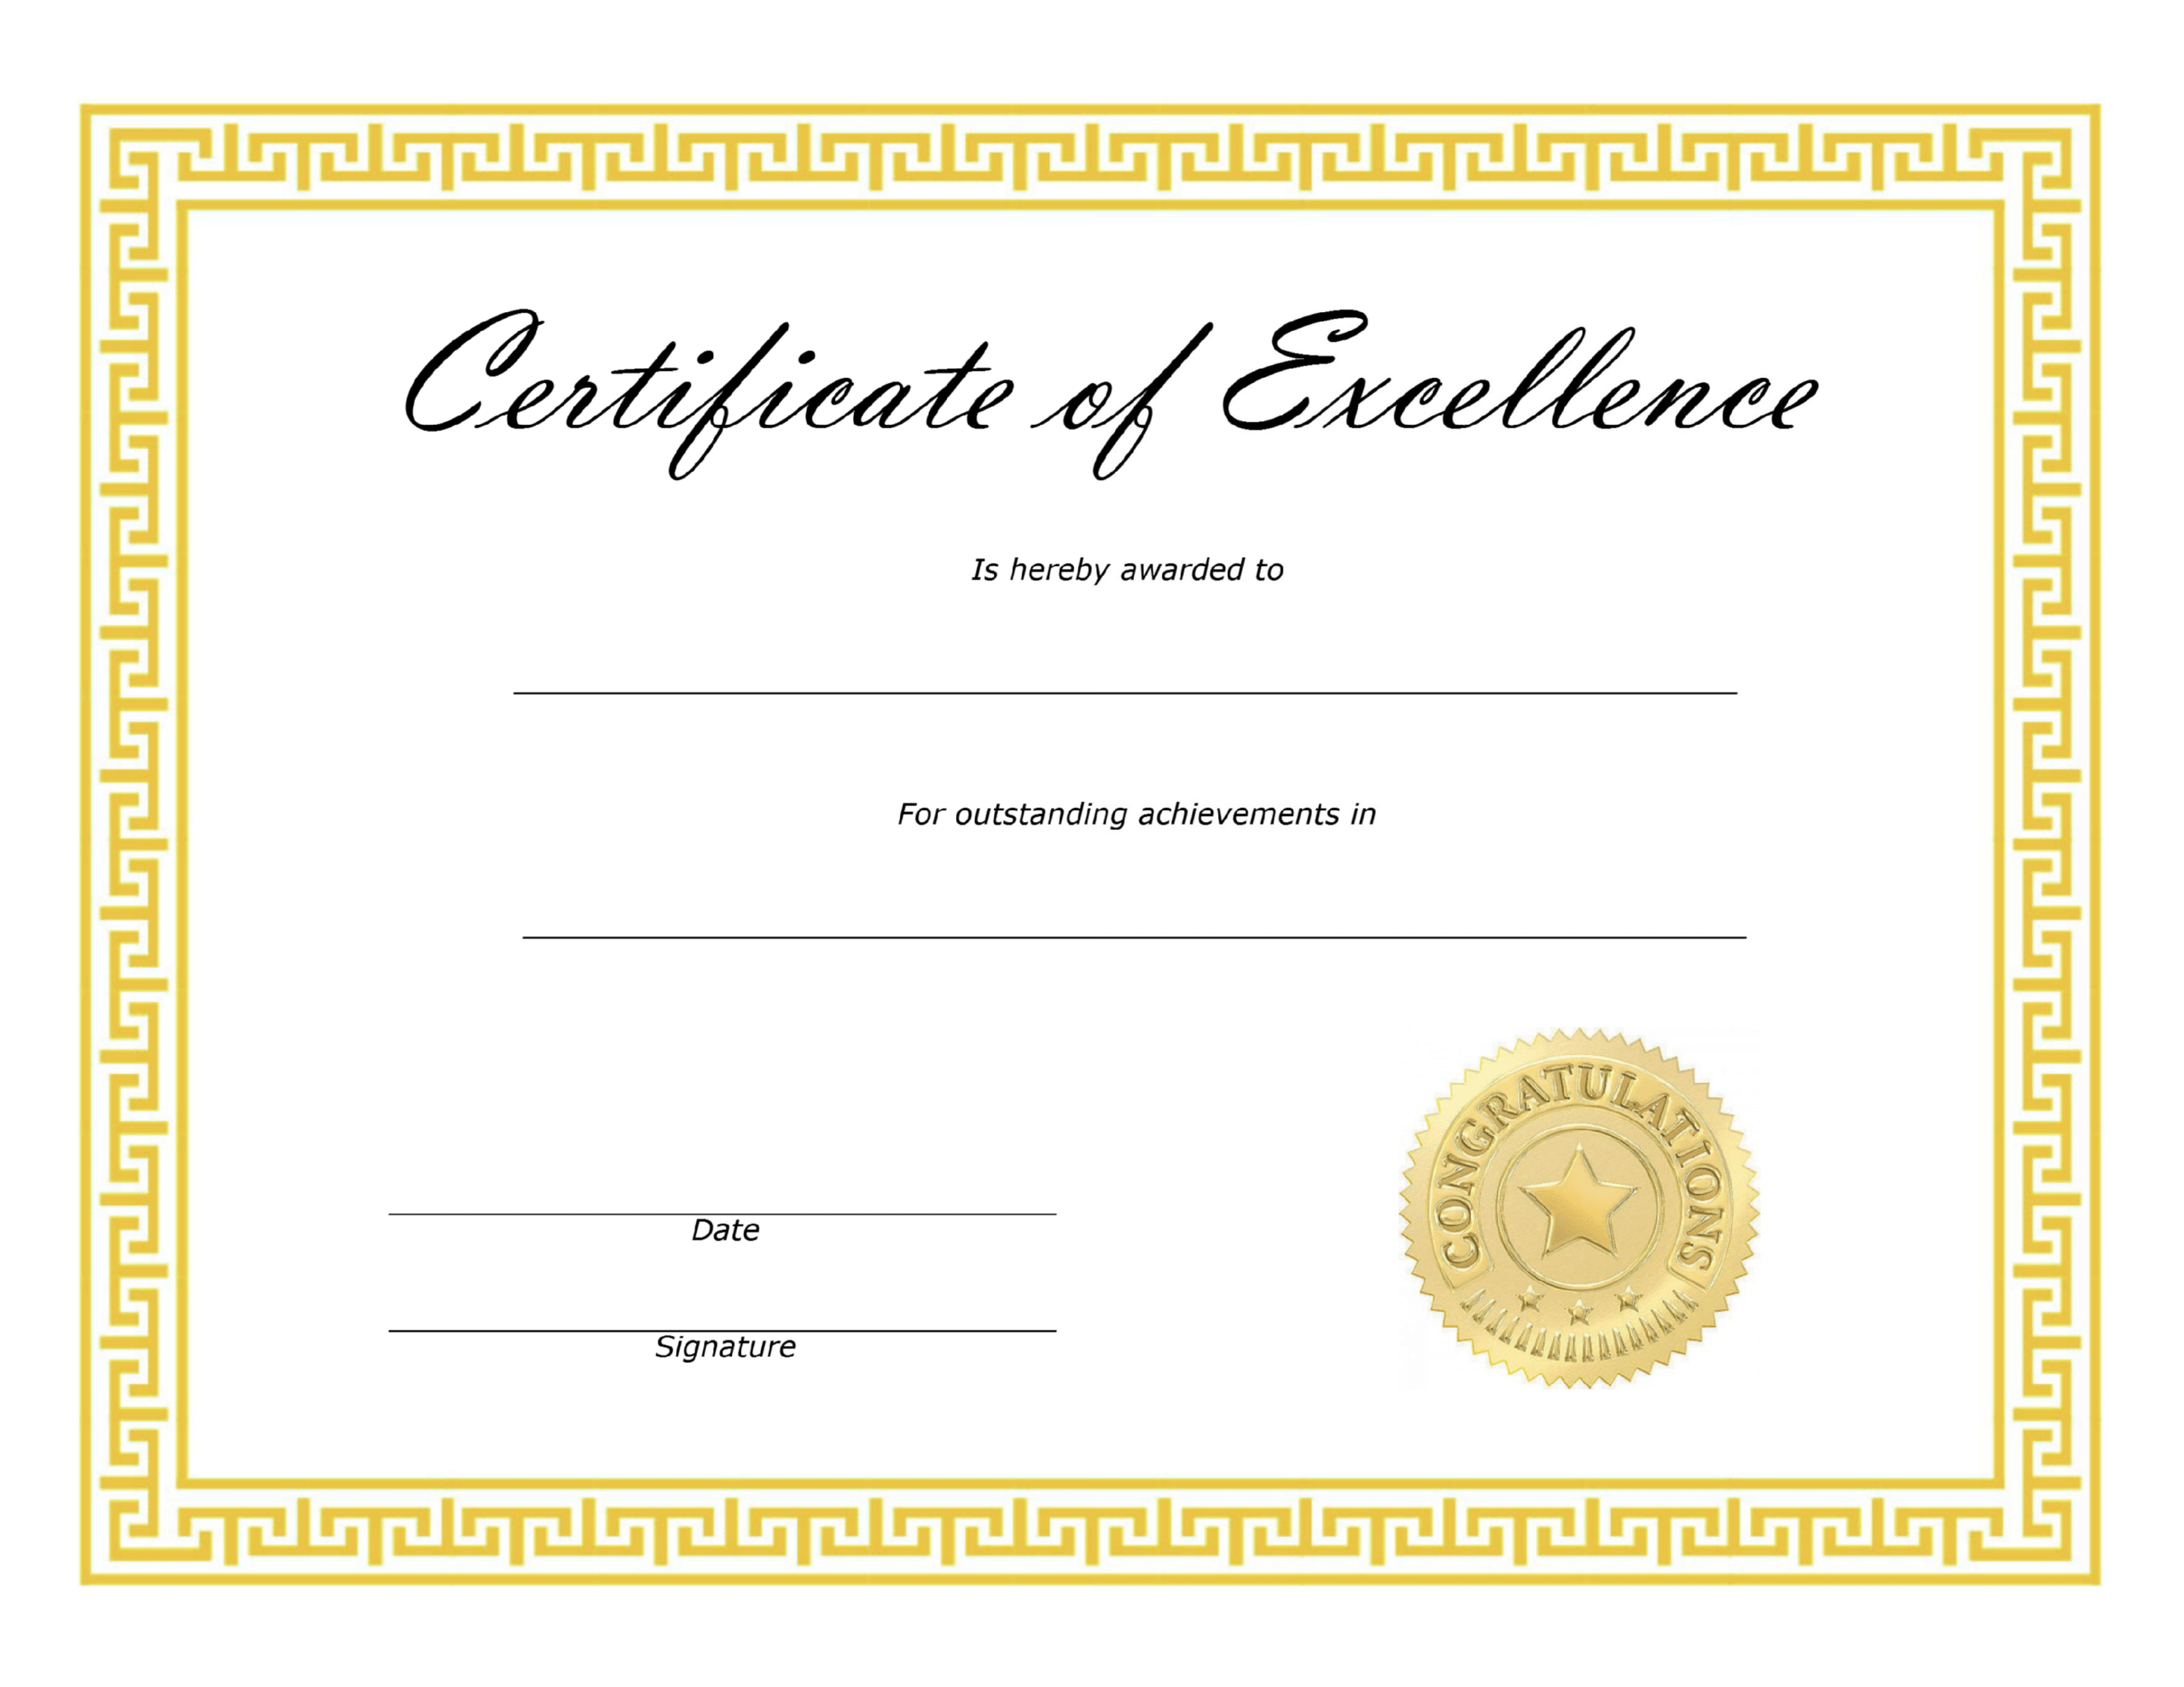 ❤️ Free Sample Certificate Of Excellence Templates❤️ Pertaining To Award Of Excellence Certificate Template